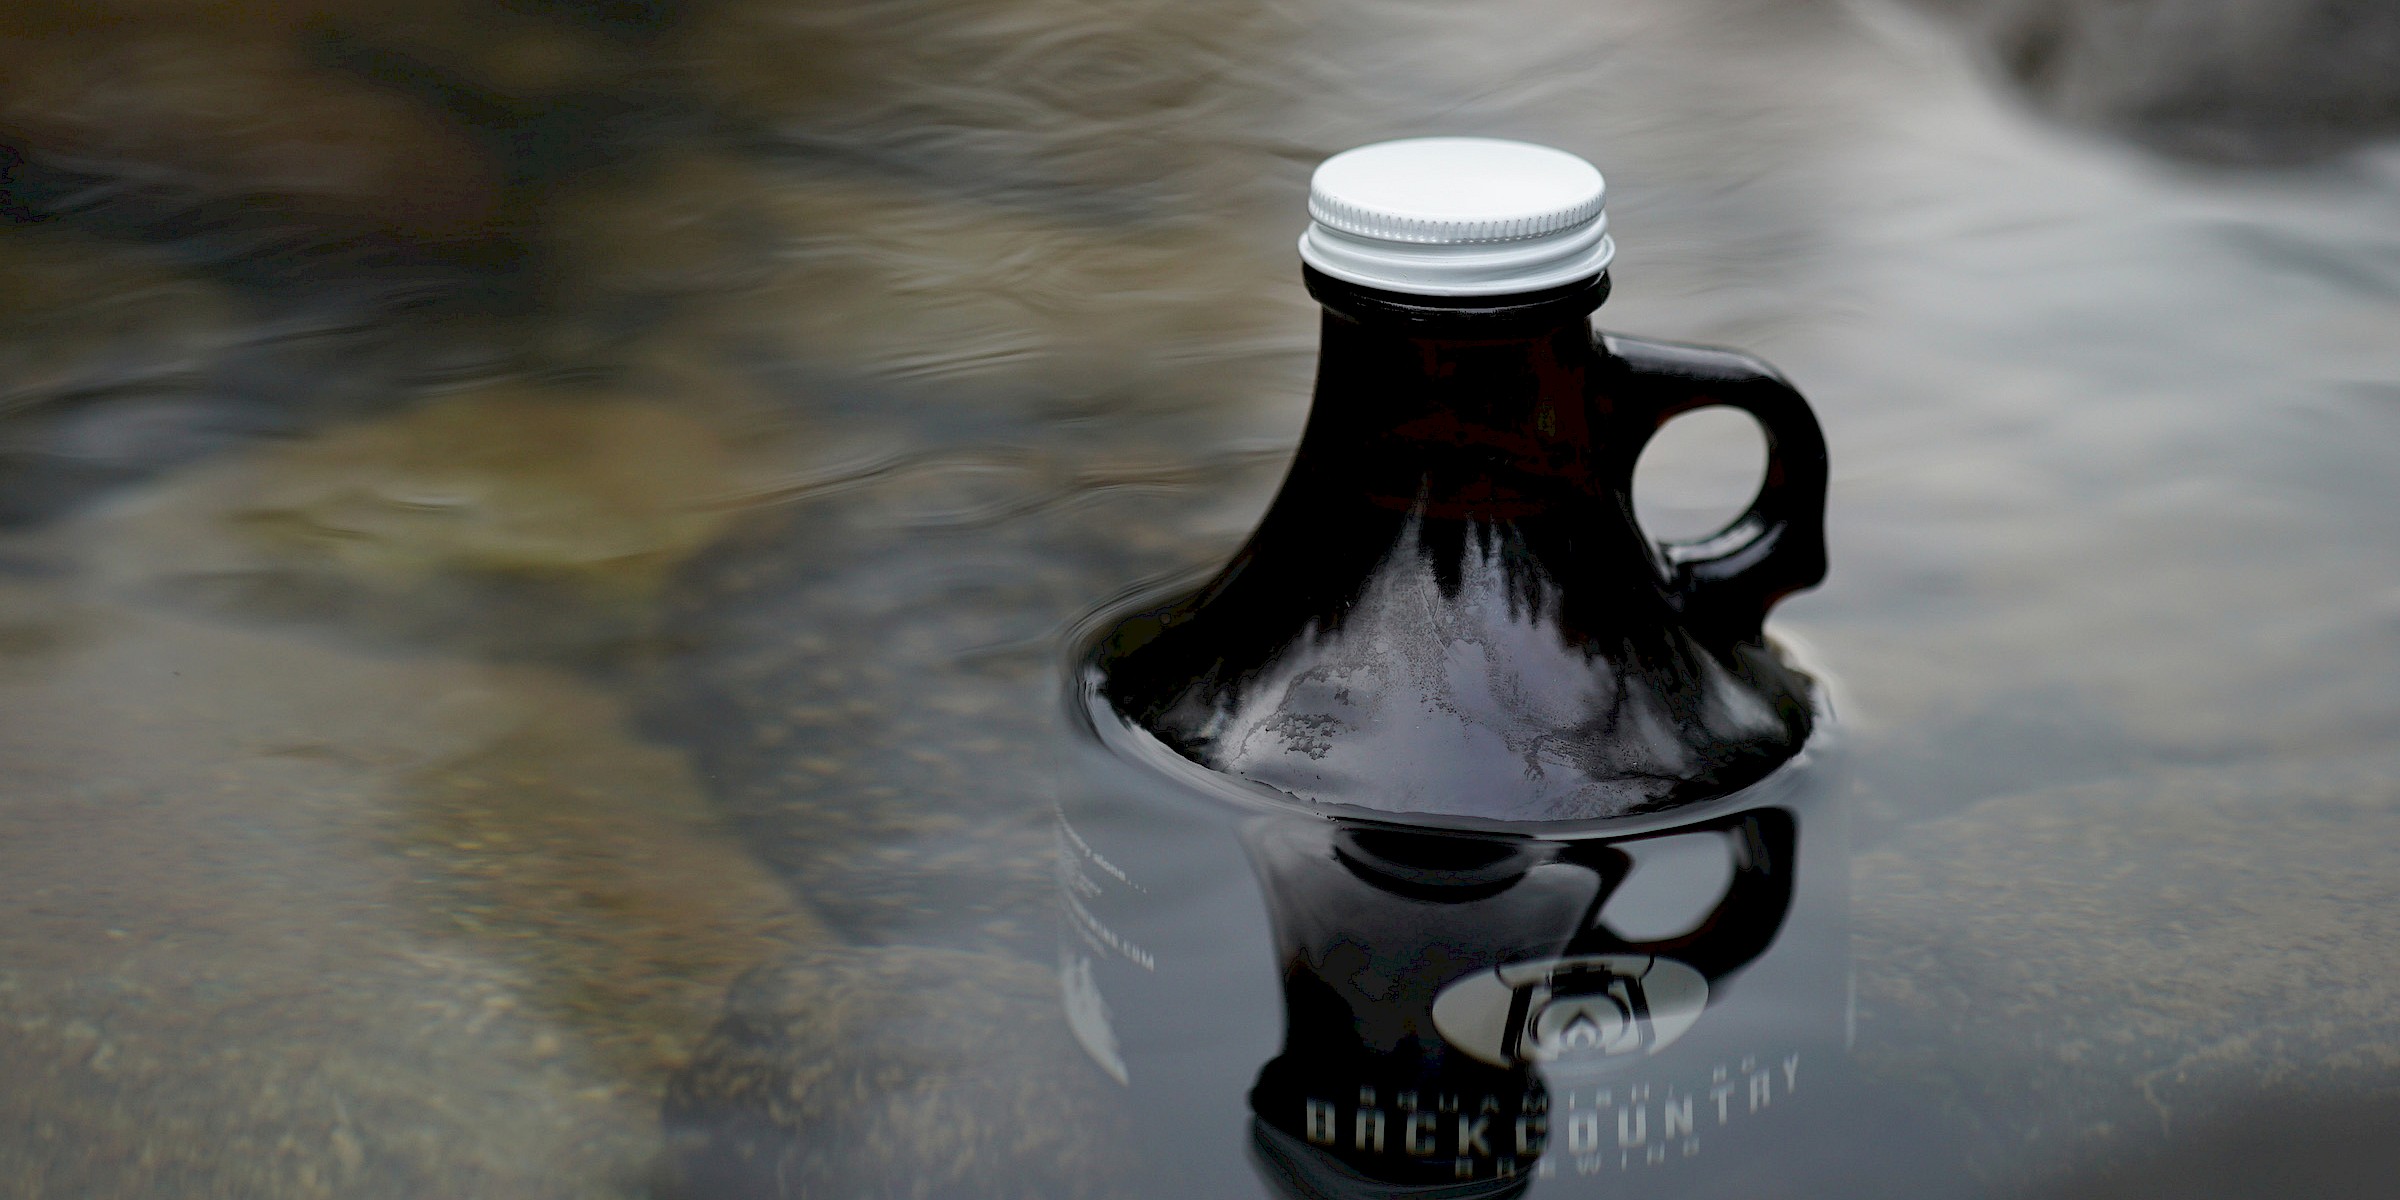 Backcountry Brewing Growler cooling in a clear stream